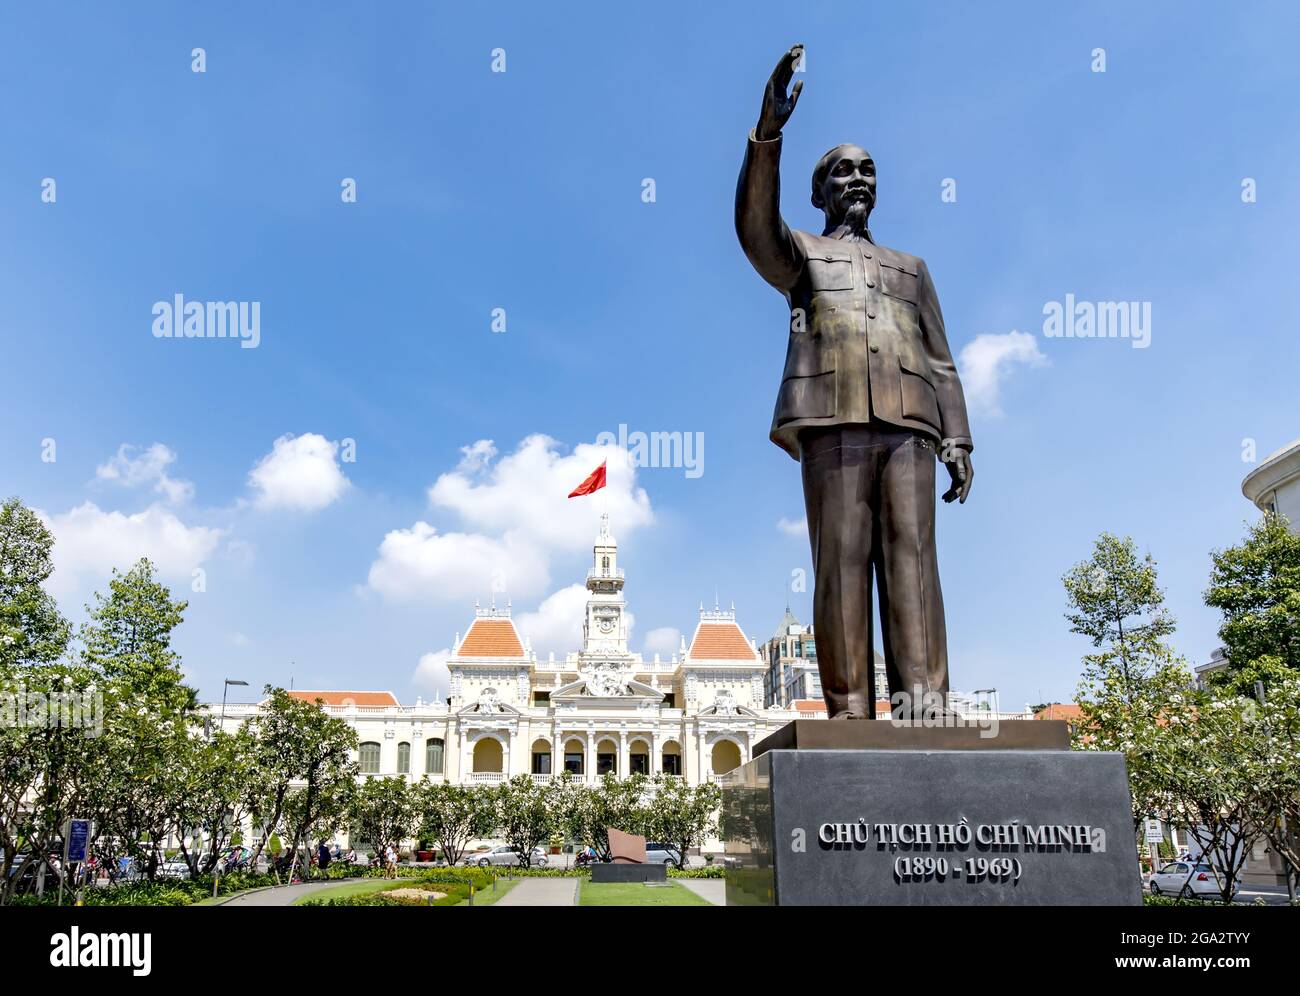 Statue of Ho Chi Minh in front of  the French colonial era City Hall in Ho Chi Minh City; Ho Chi Minh City, Ho Chi Minh, Vietnam Stock Photo